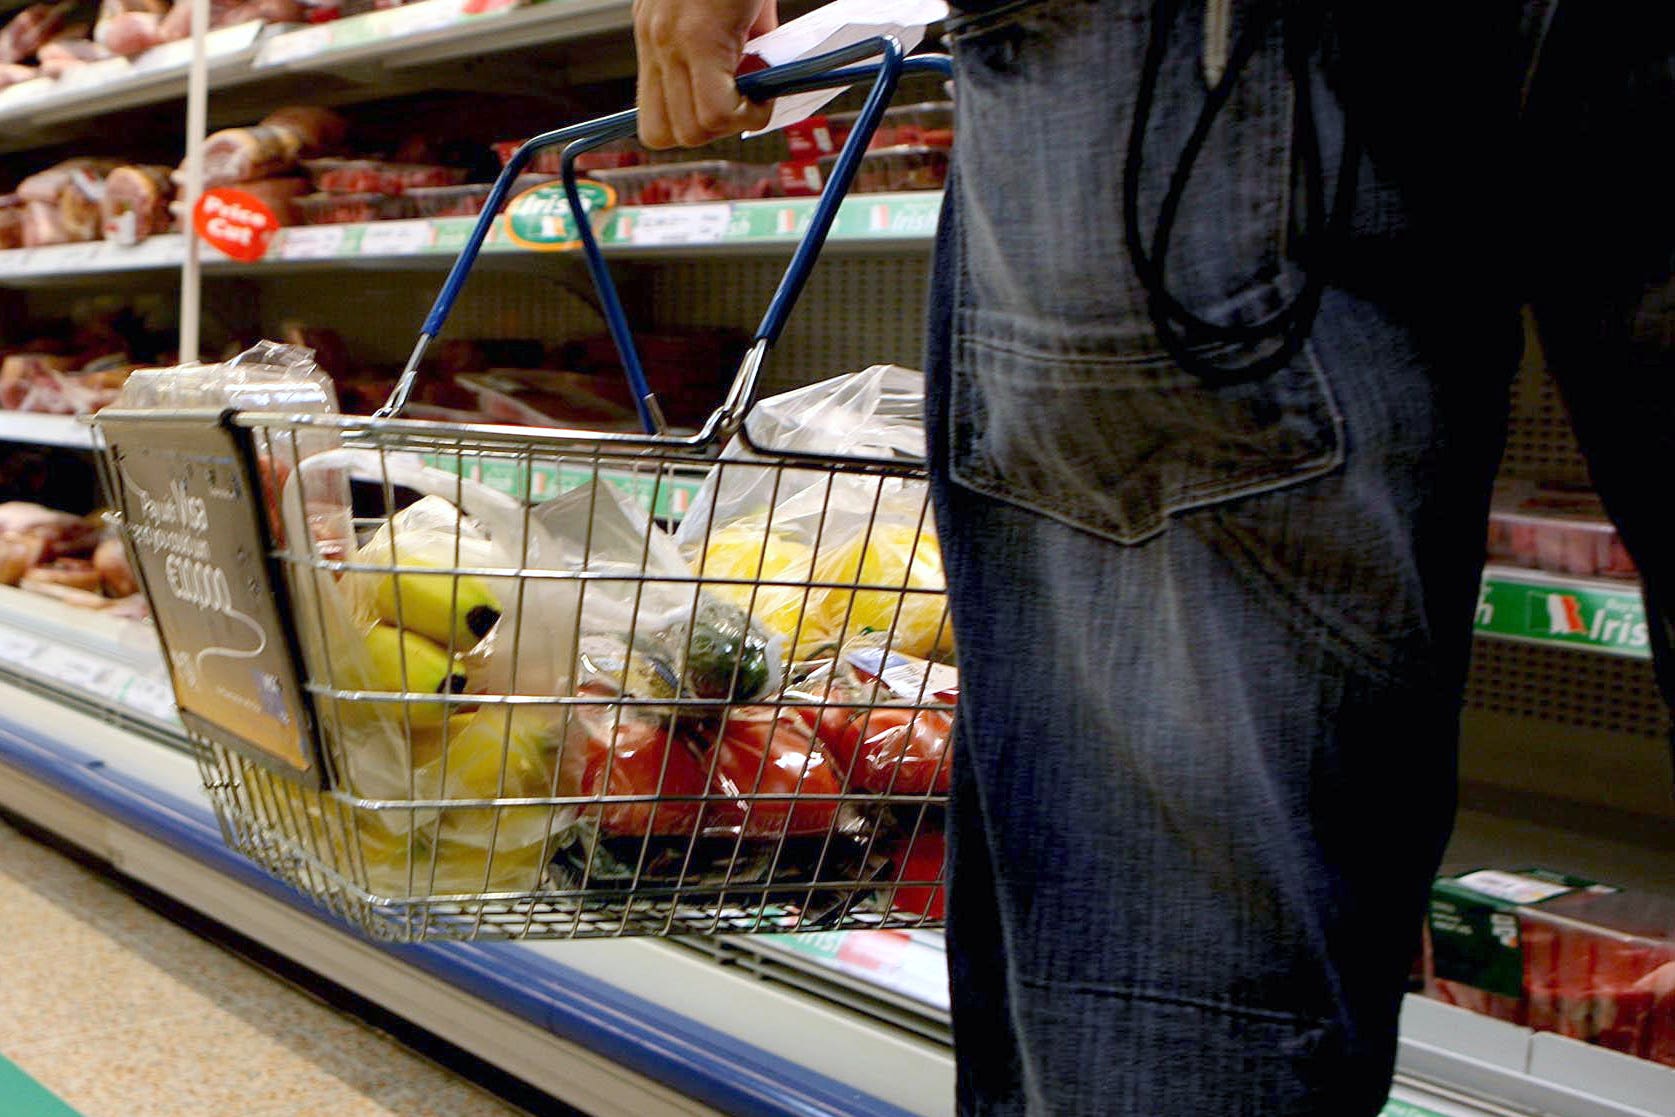 UK inflation eased back by more than expected last month from October’s 41-year high